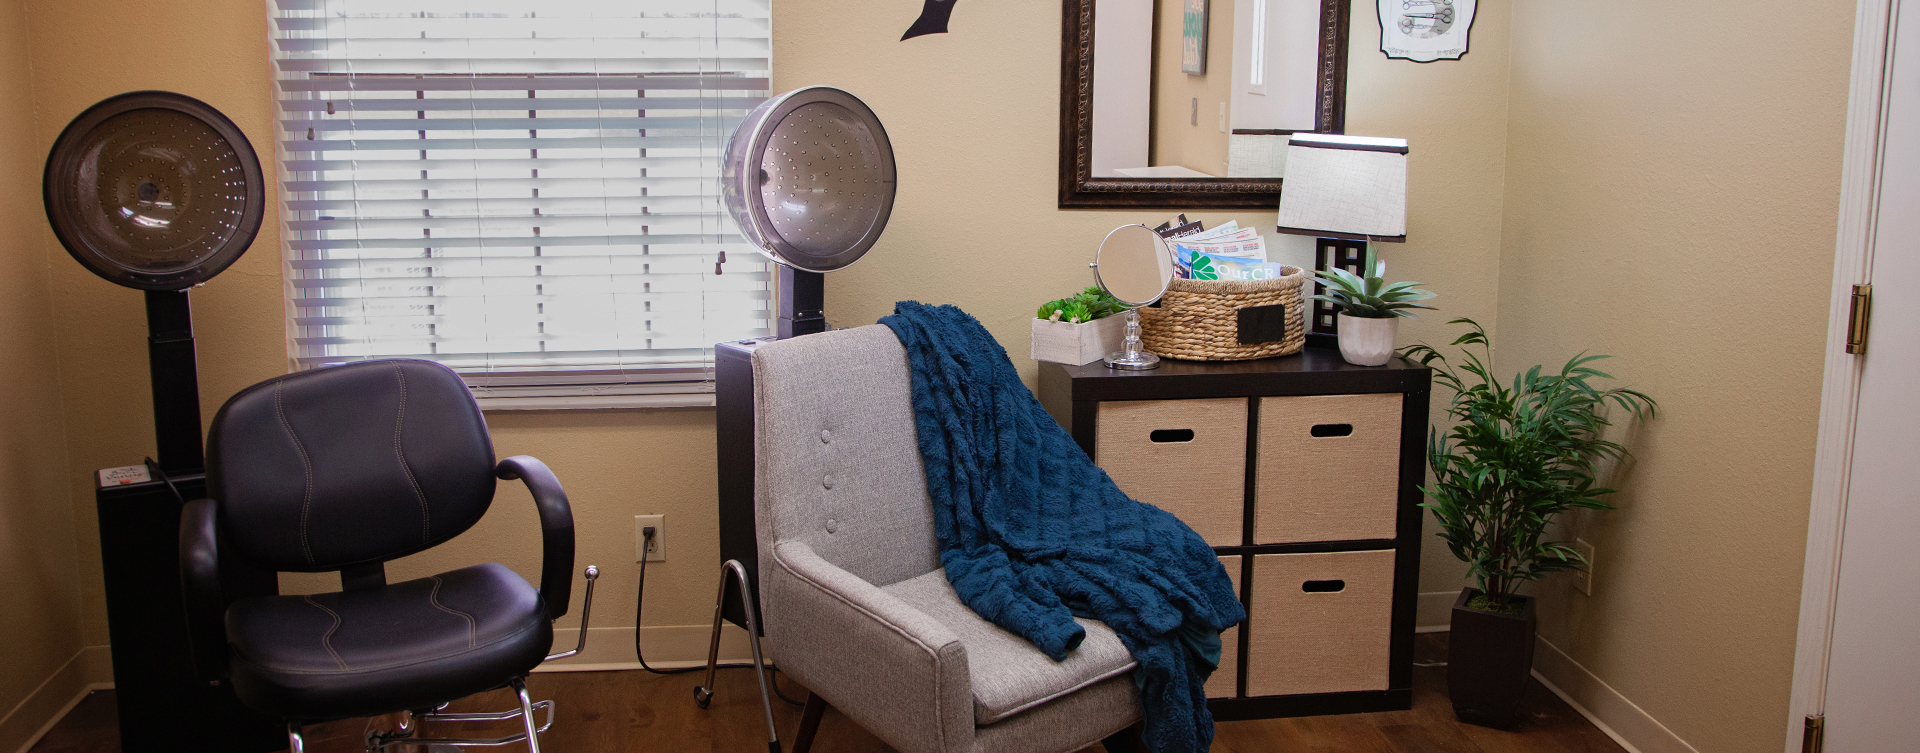 Receive personalized, at-home treatment from our stylist in the salon at Bickford of Marion